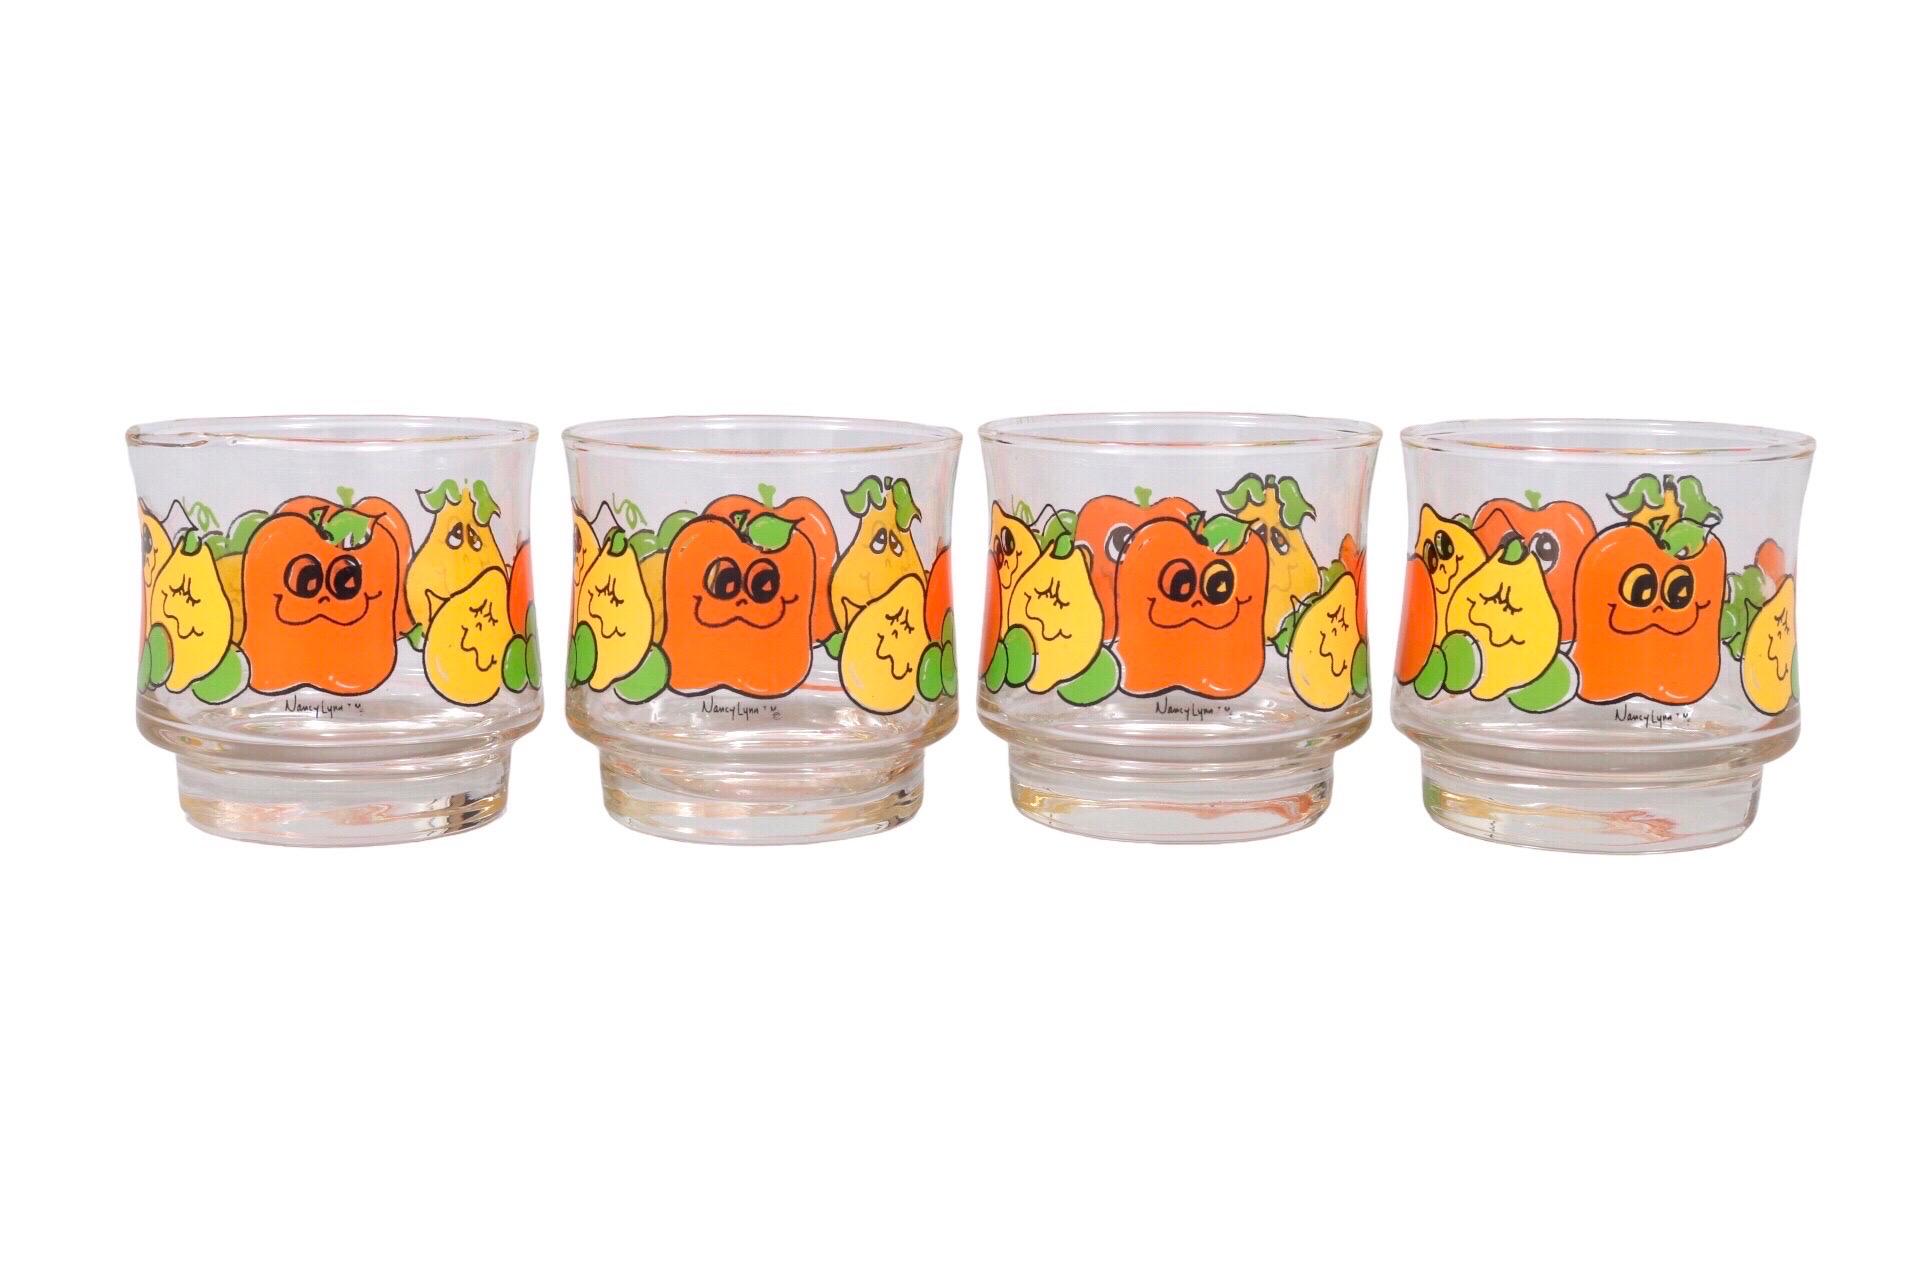 A set of four Nancy Lynn for Anchor Hocking glasses. Concave curved glasses for easy holding are decorated with stylized green, yellow & orange fruits. Lemons and apples have smiling cartoon faces. The design includes the Nancy Lynn signature